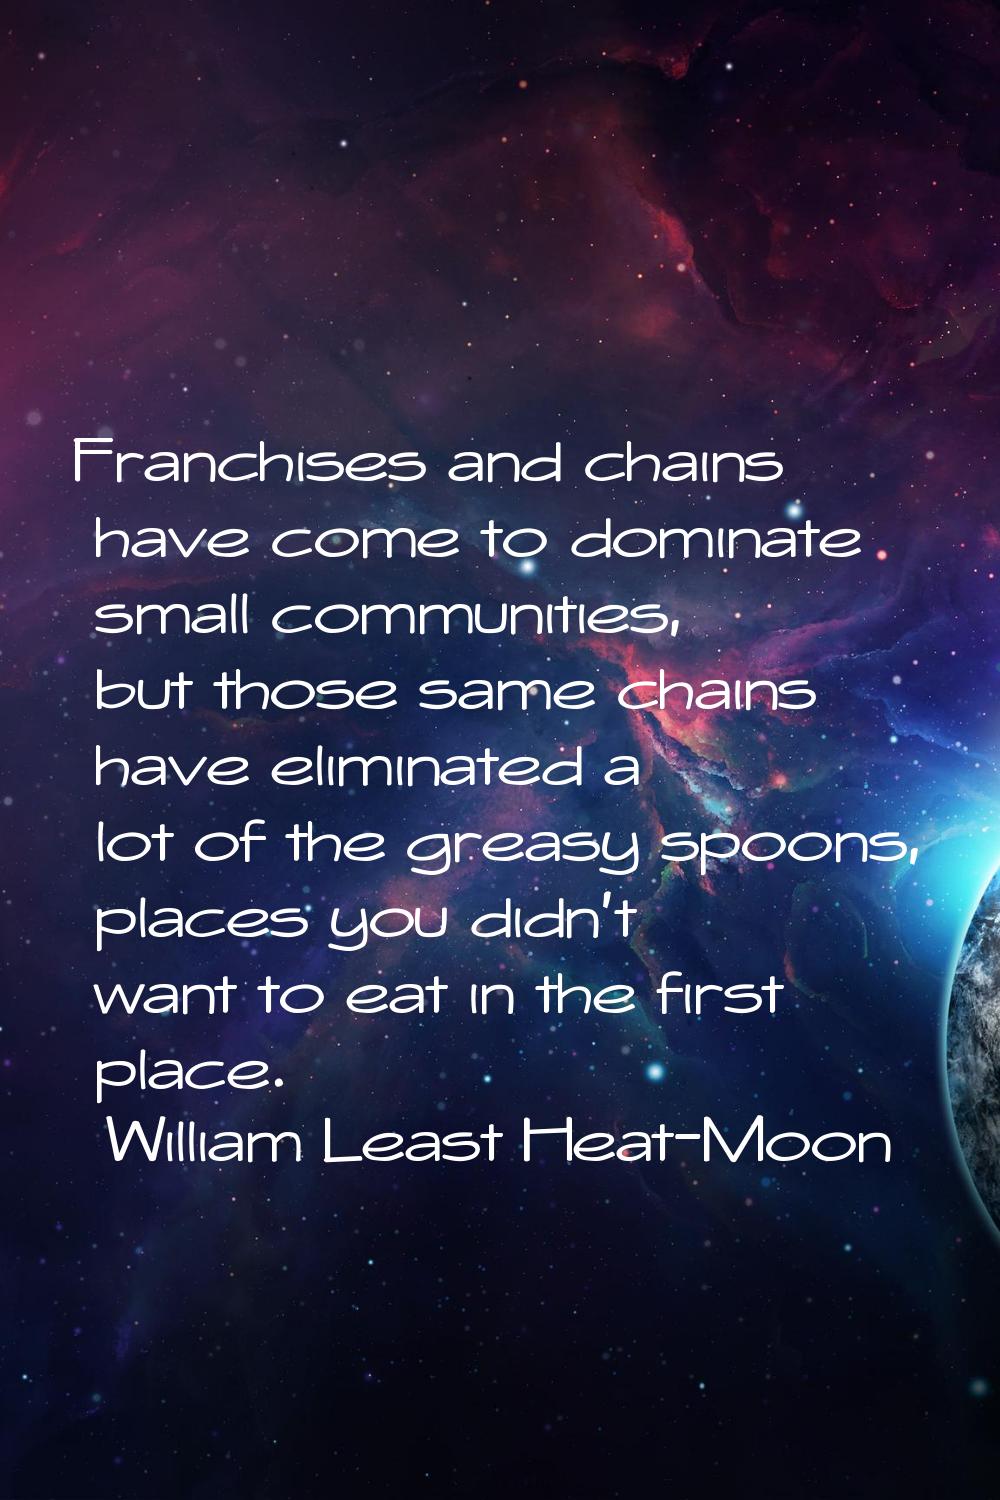 Franchises and chains have come to dominate small communities, but those same chains have eliminate